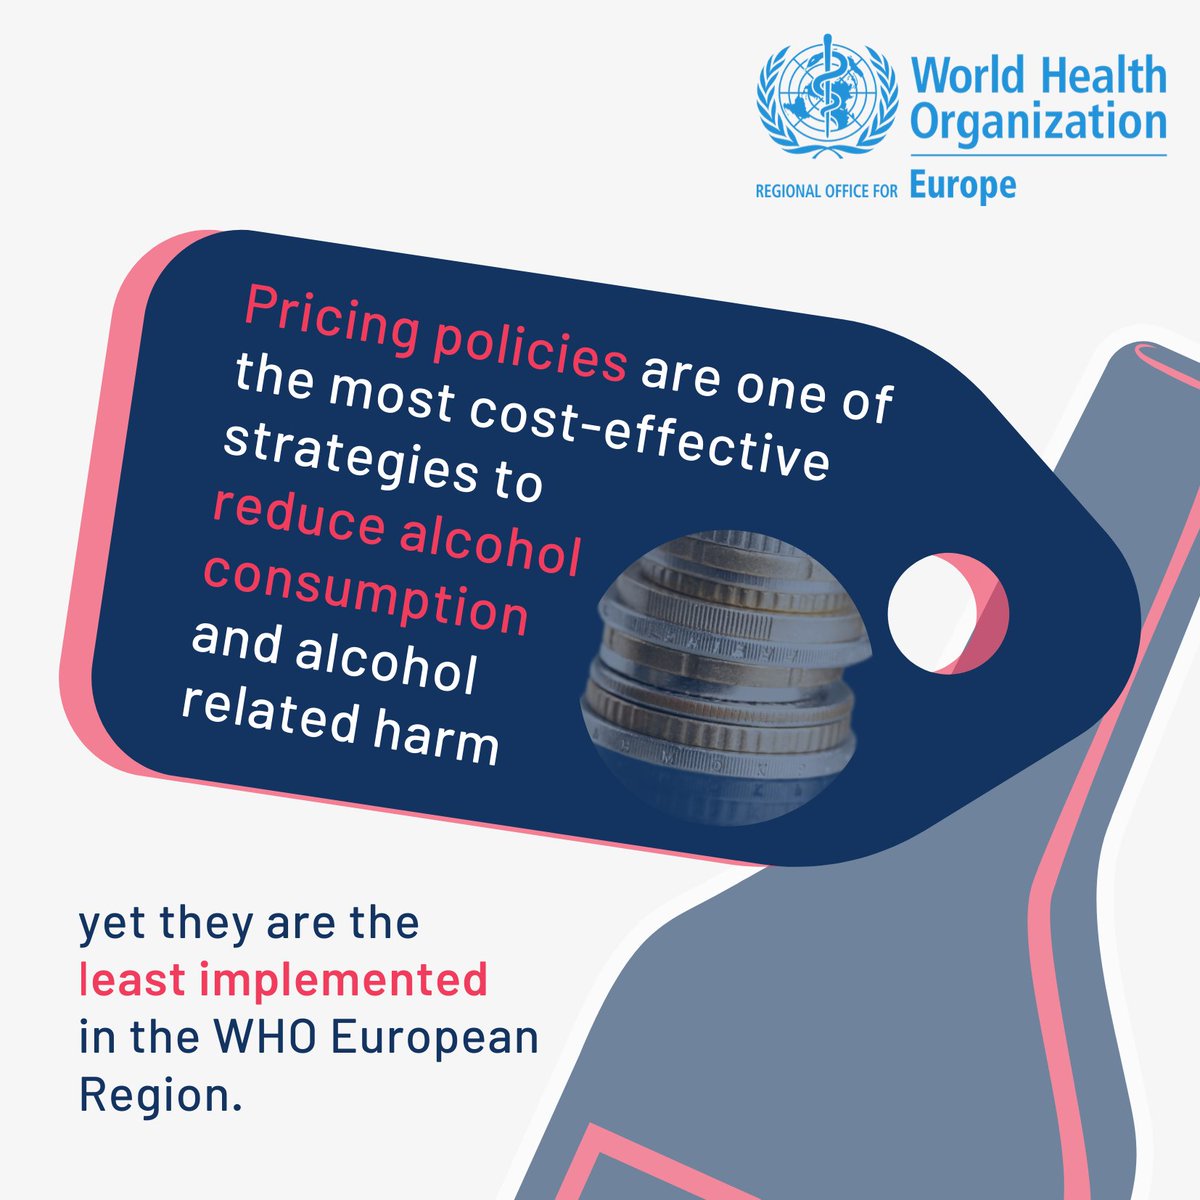 Pricing policies are one of the most cost-effective strategies to reduce  #alcohol consumption and alcohol related harm, yet they are the least implemented in the WHO European region.